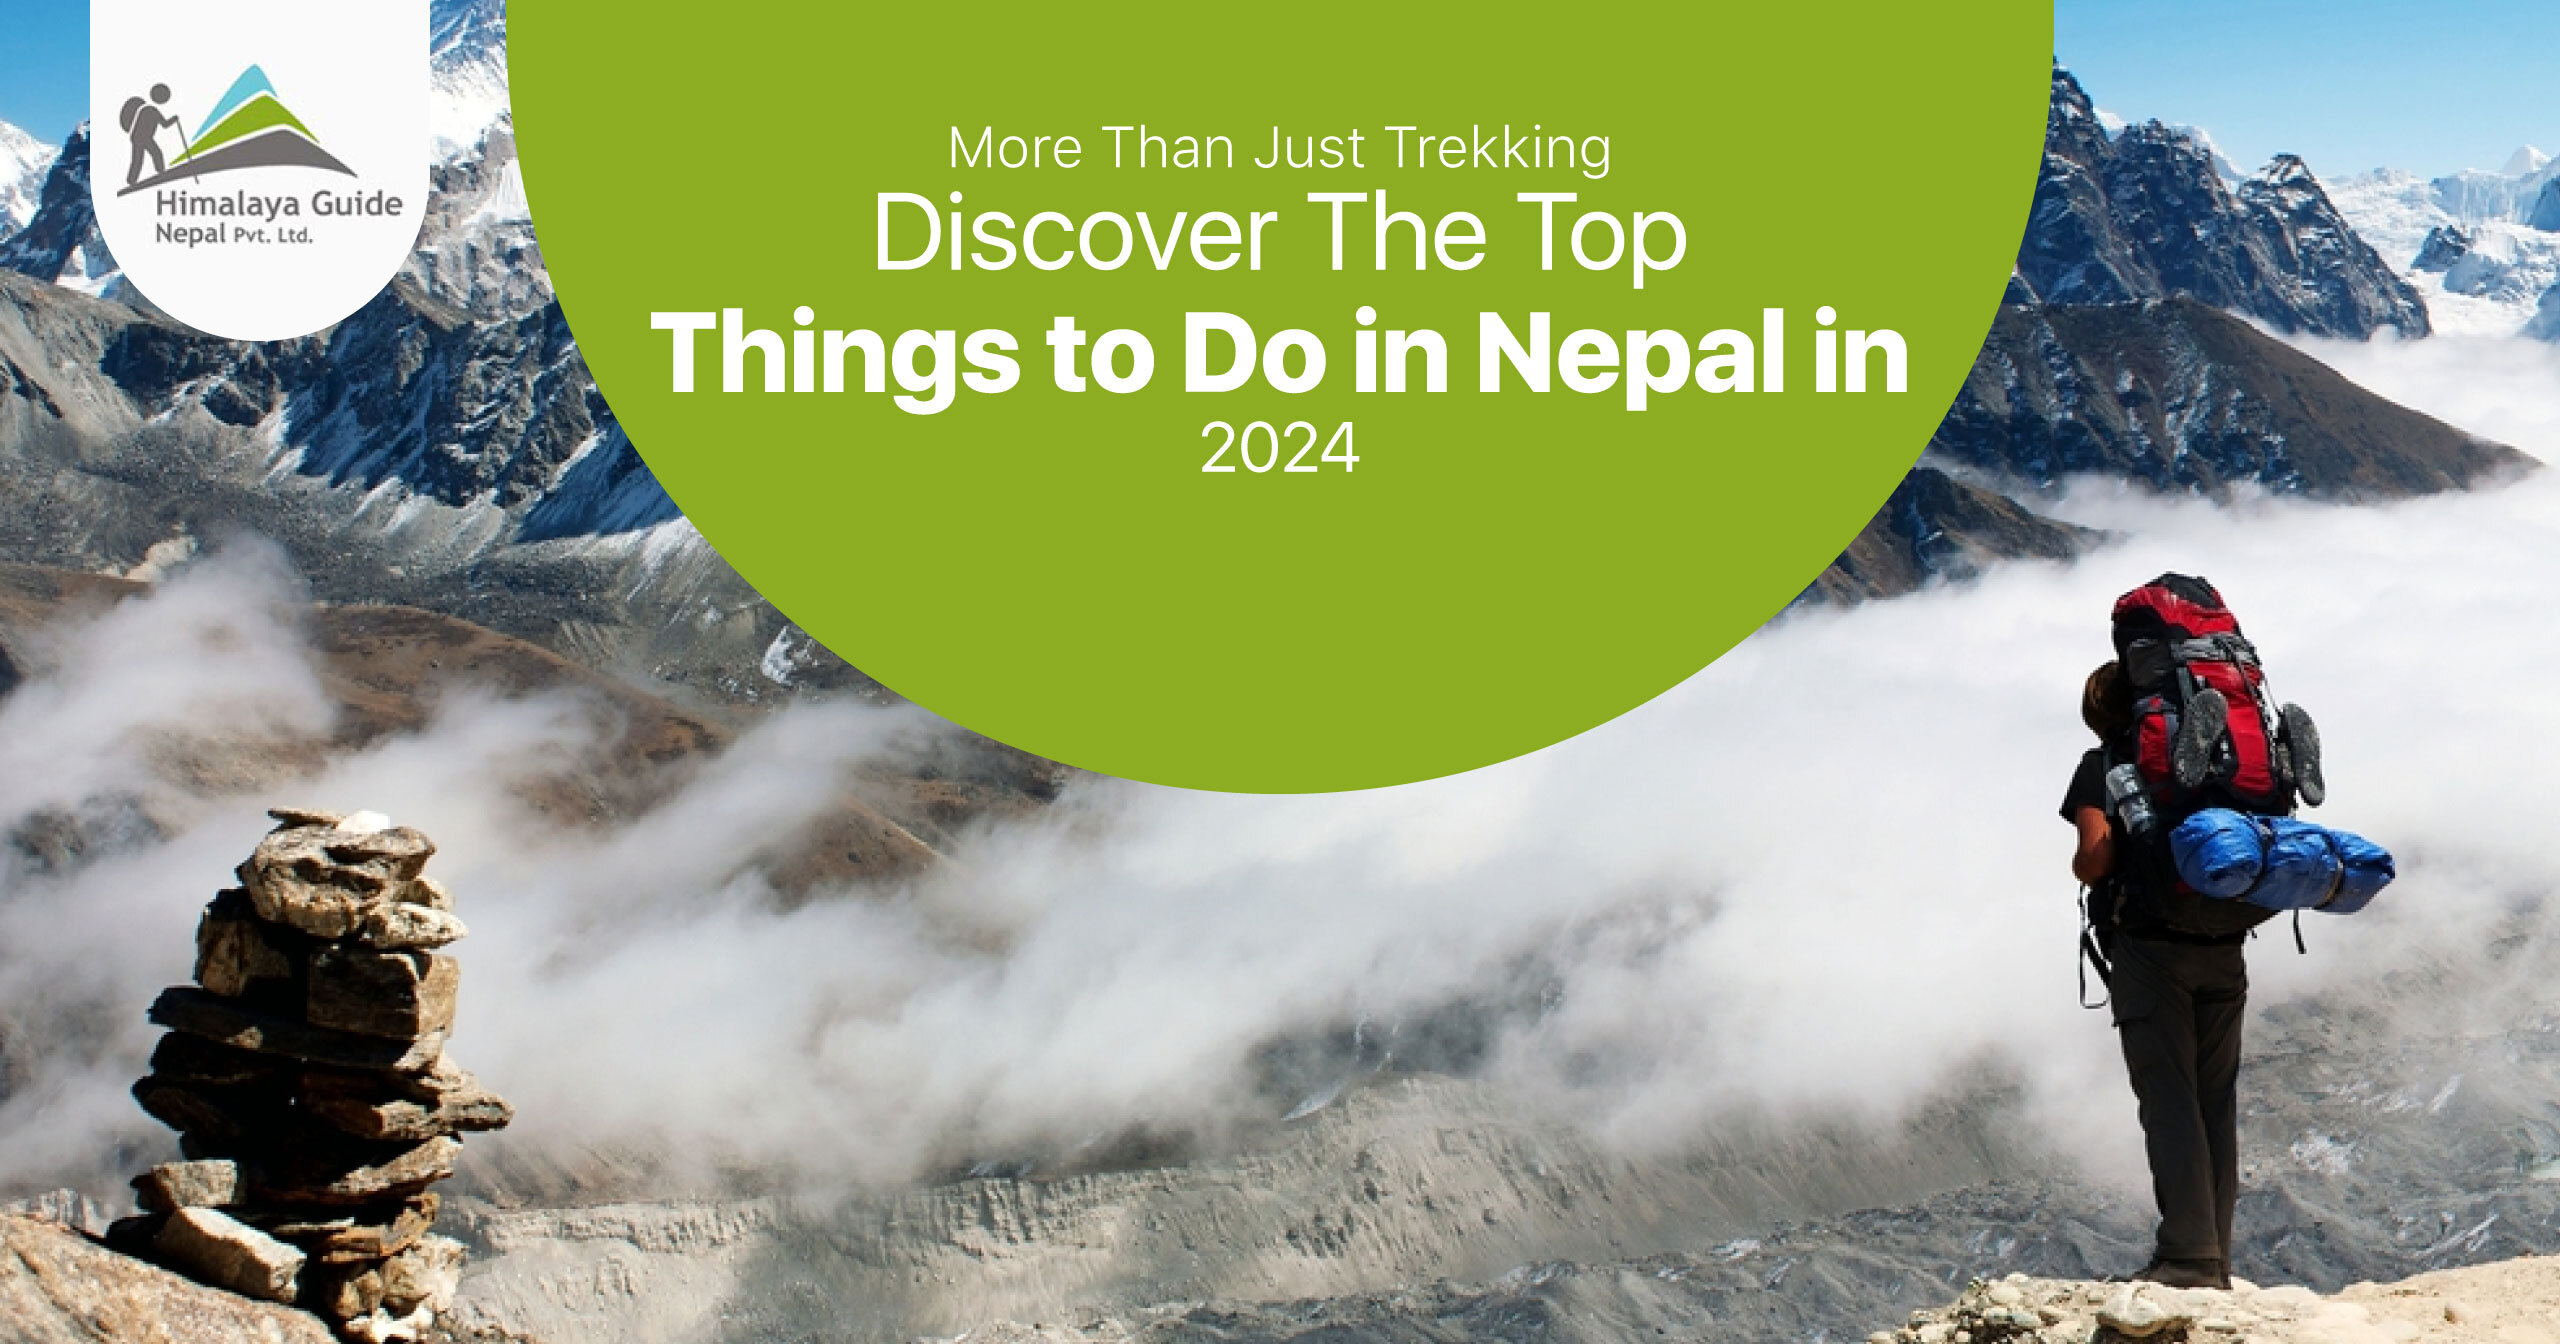 More Than Just Trekking: Discover the Top Things to Do in Nepal in 2024